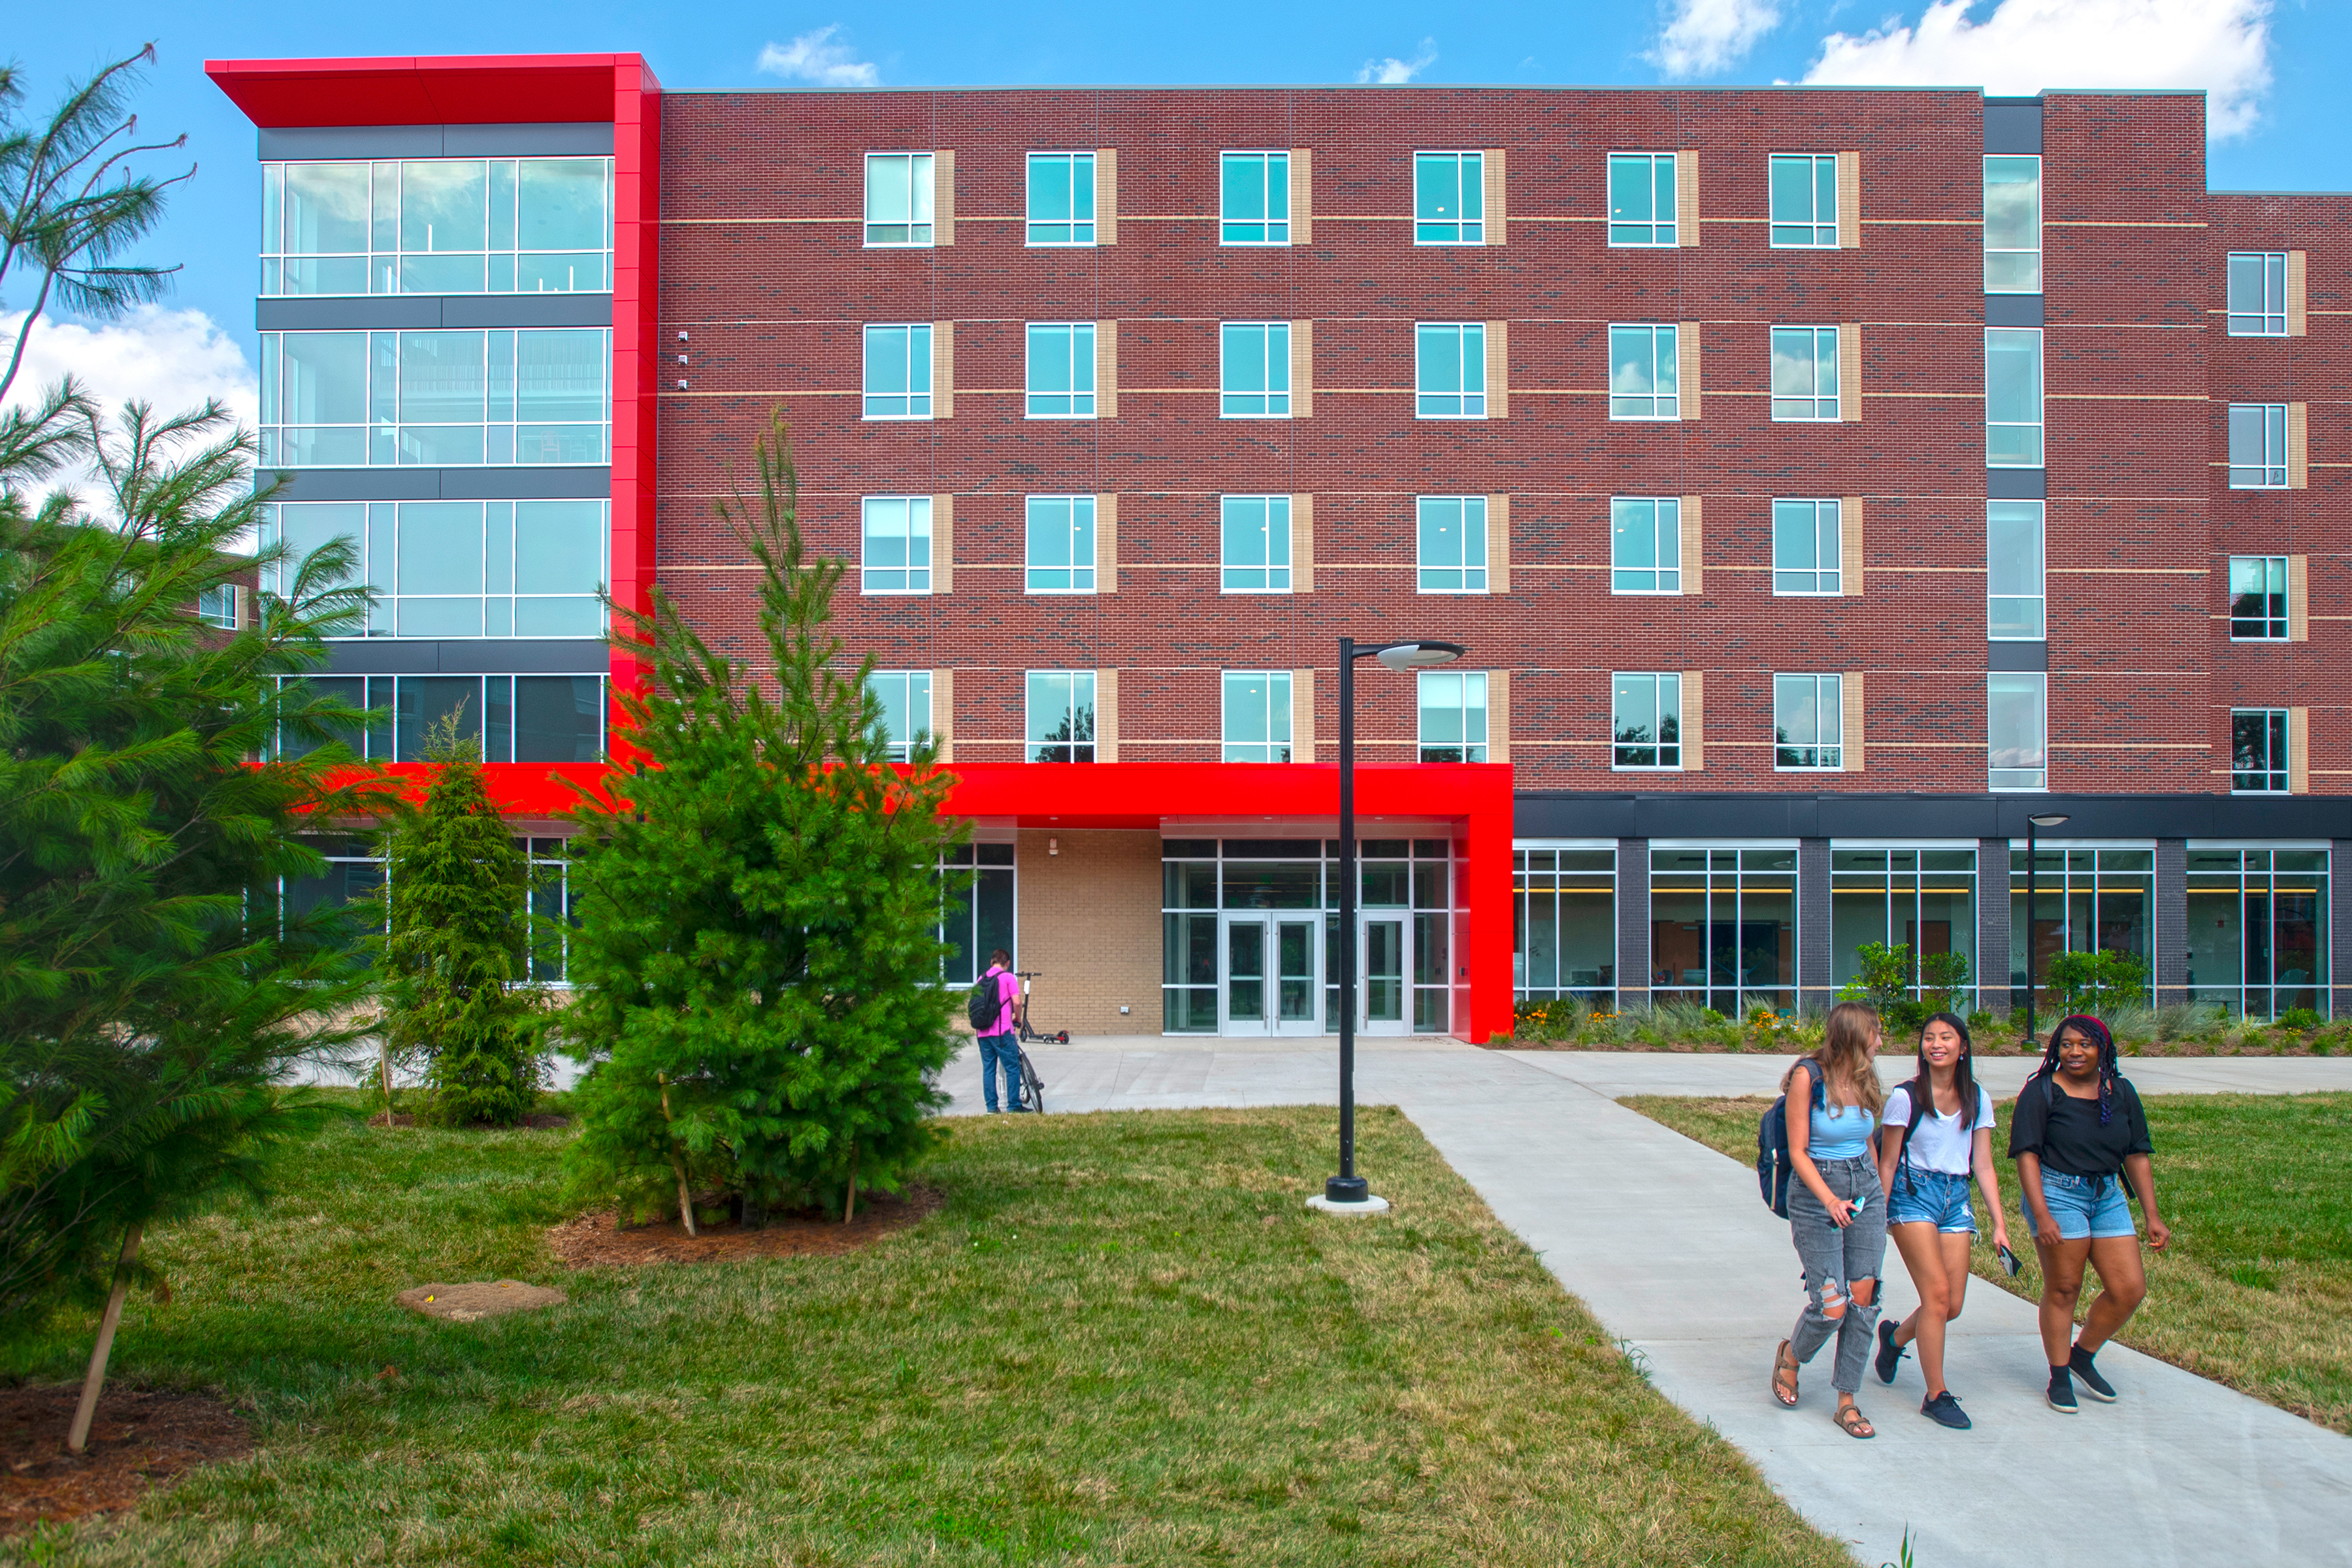 UofL creates a 'village' with new dorms